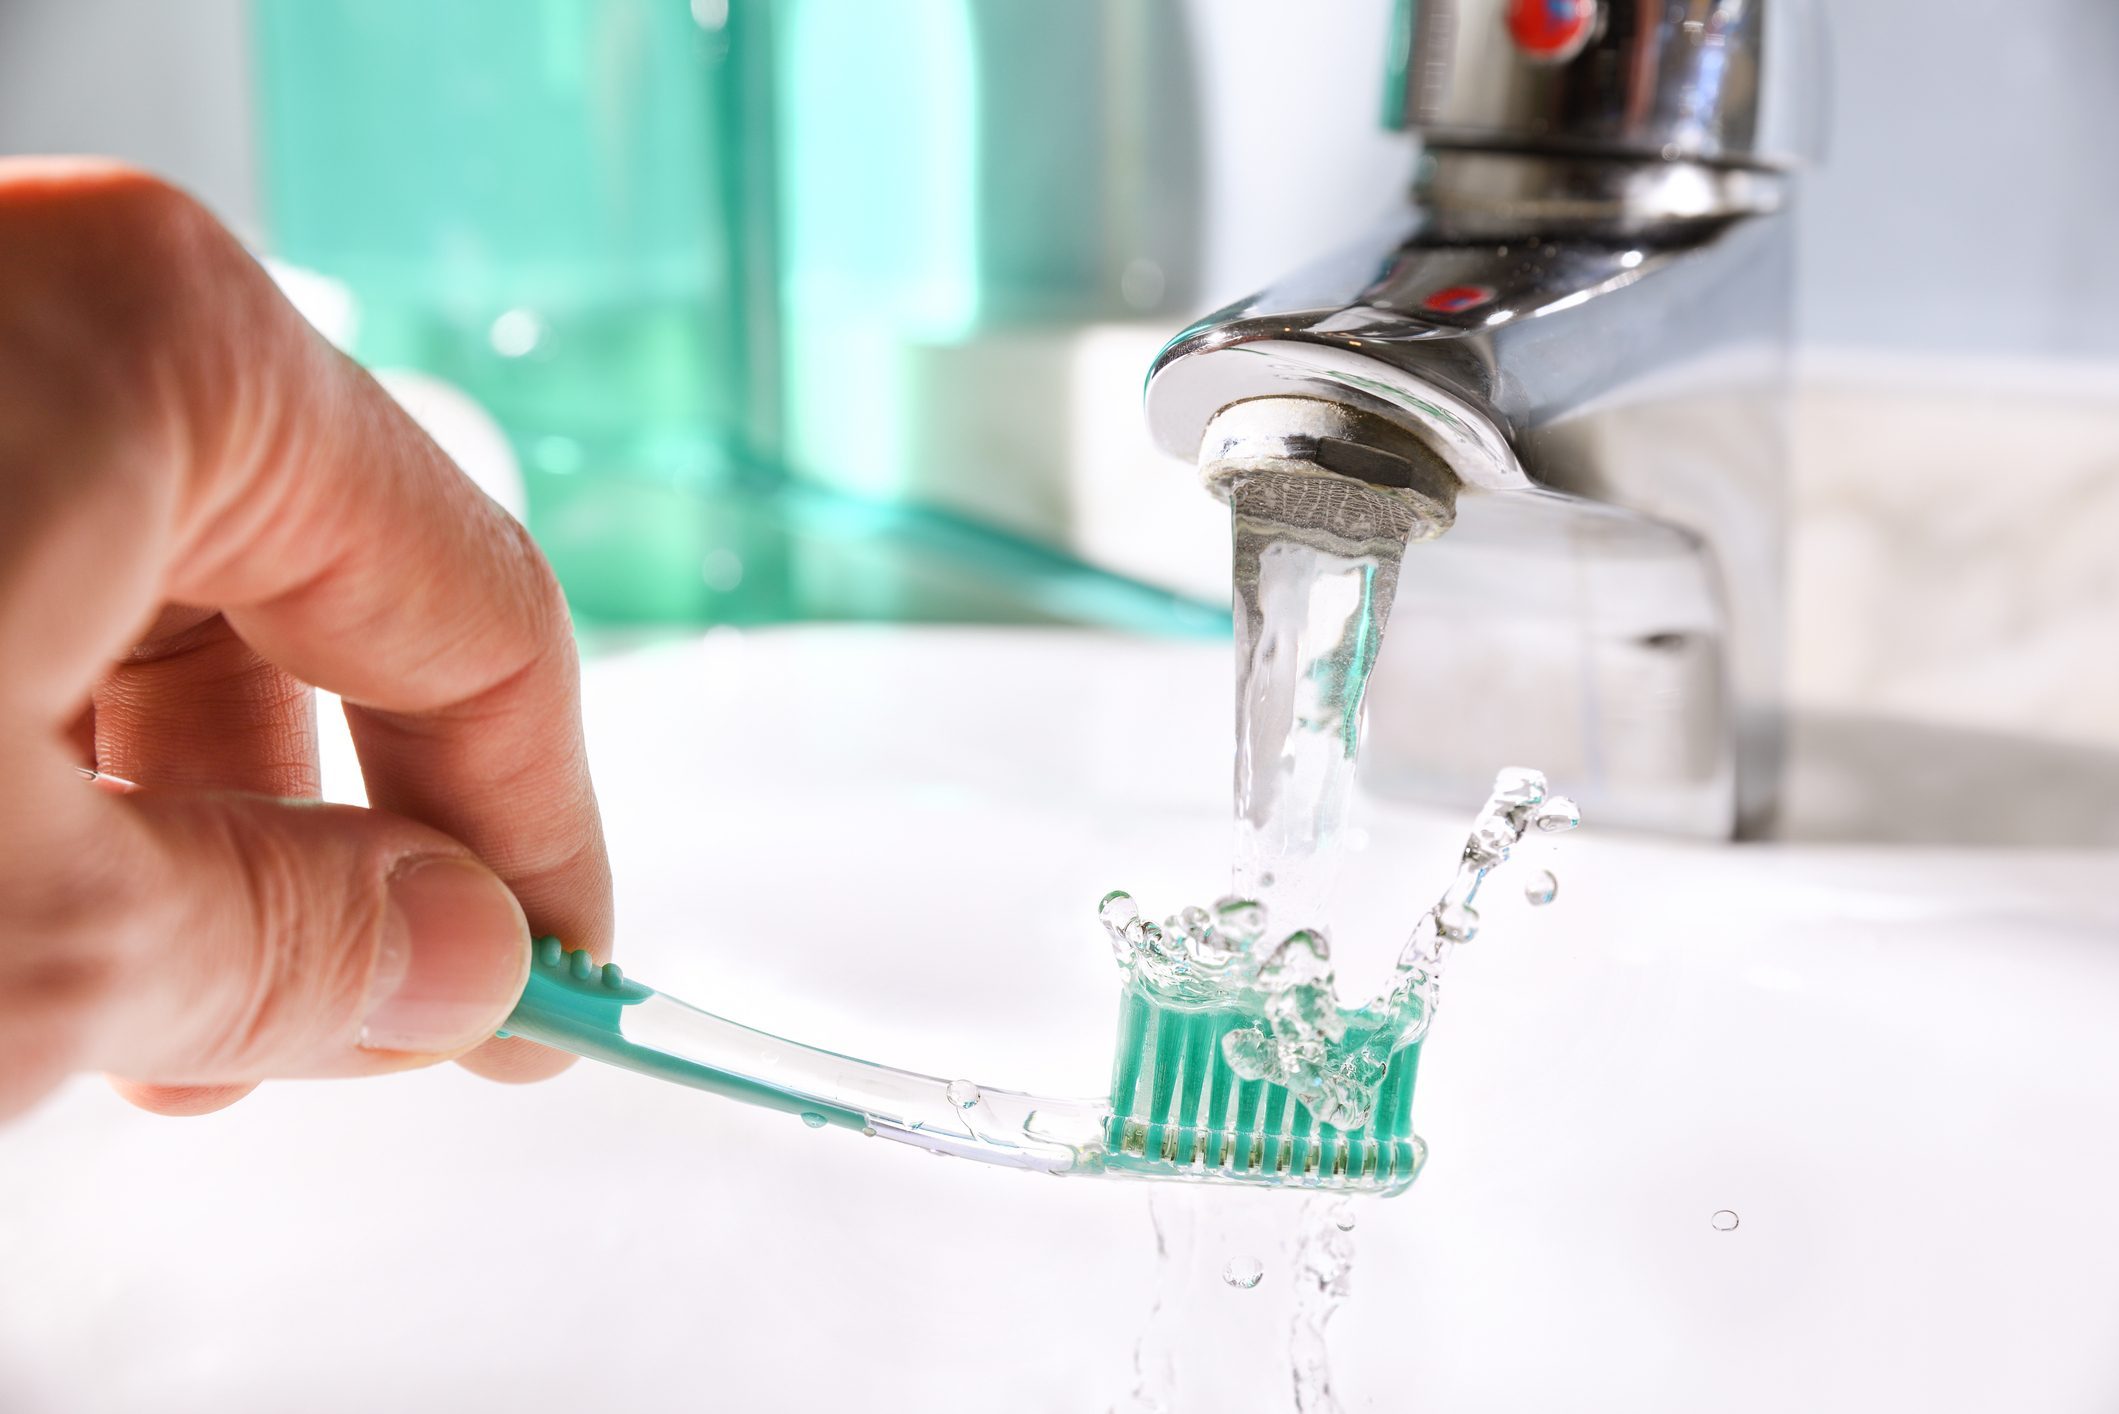 Daily Cleaning Of The Toothbrush After Use In Bathroom Sink